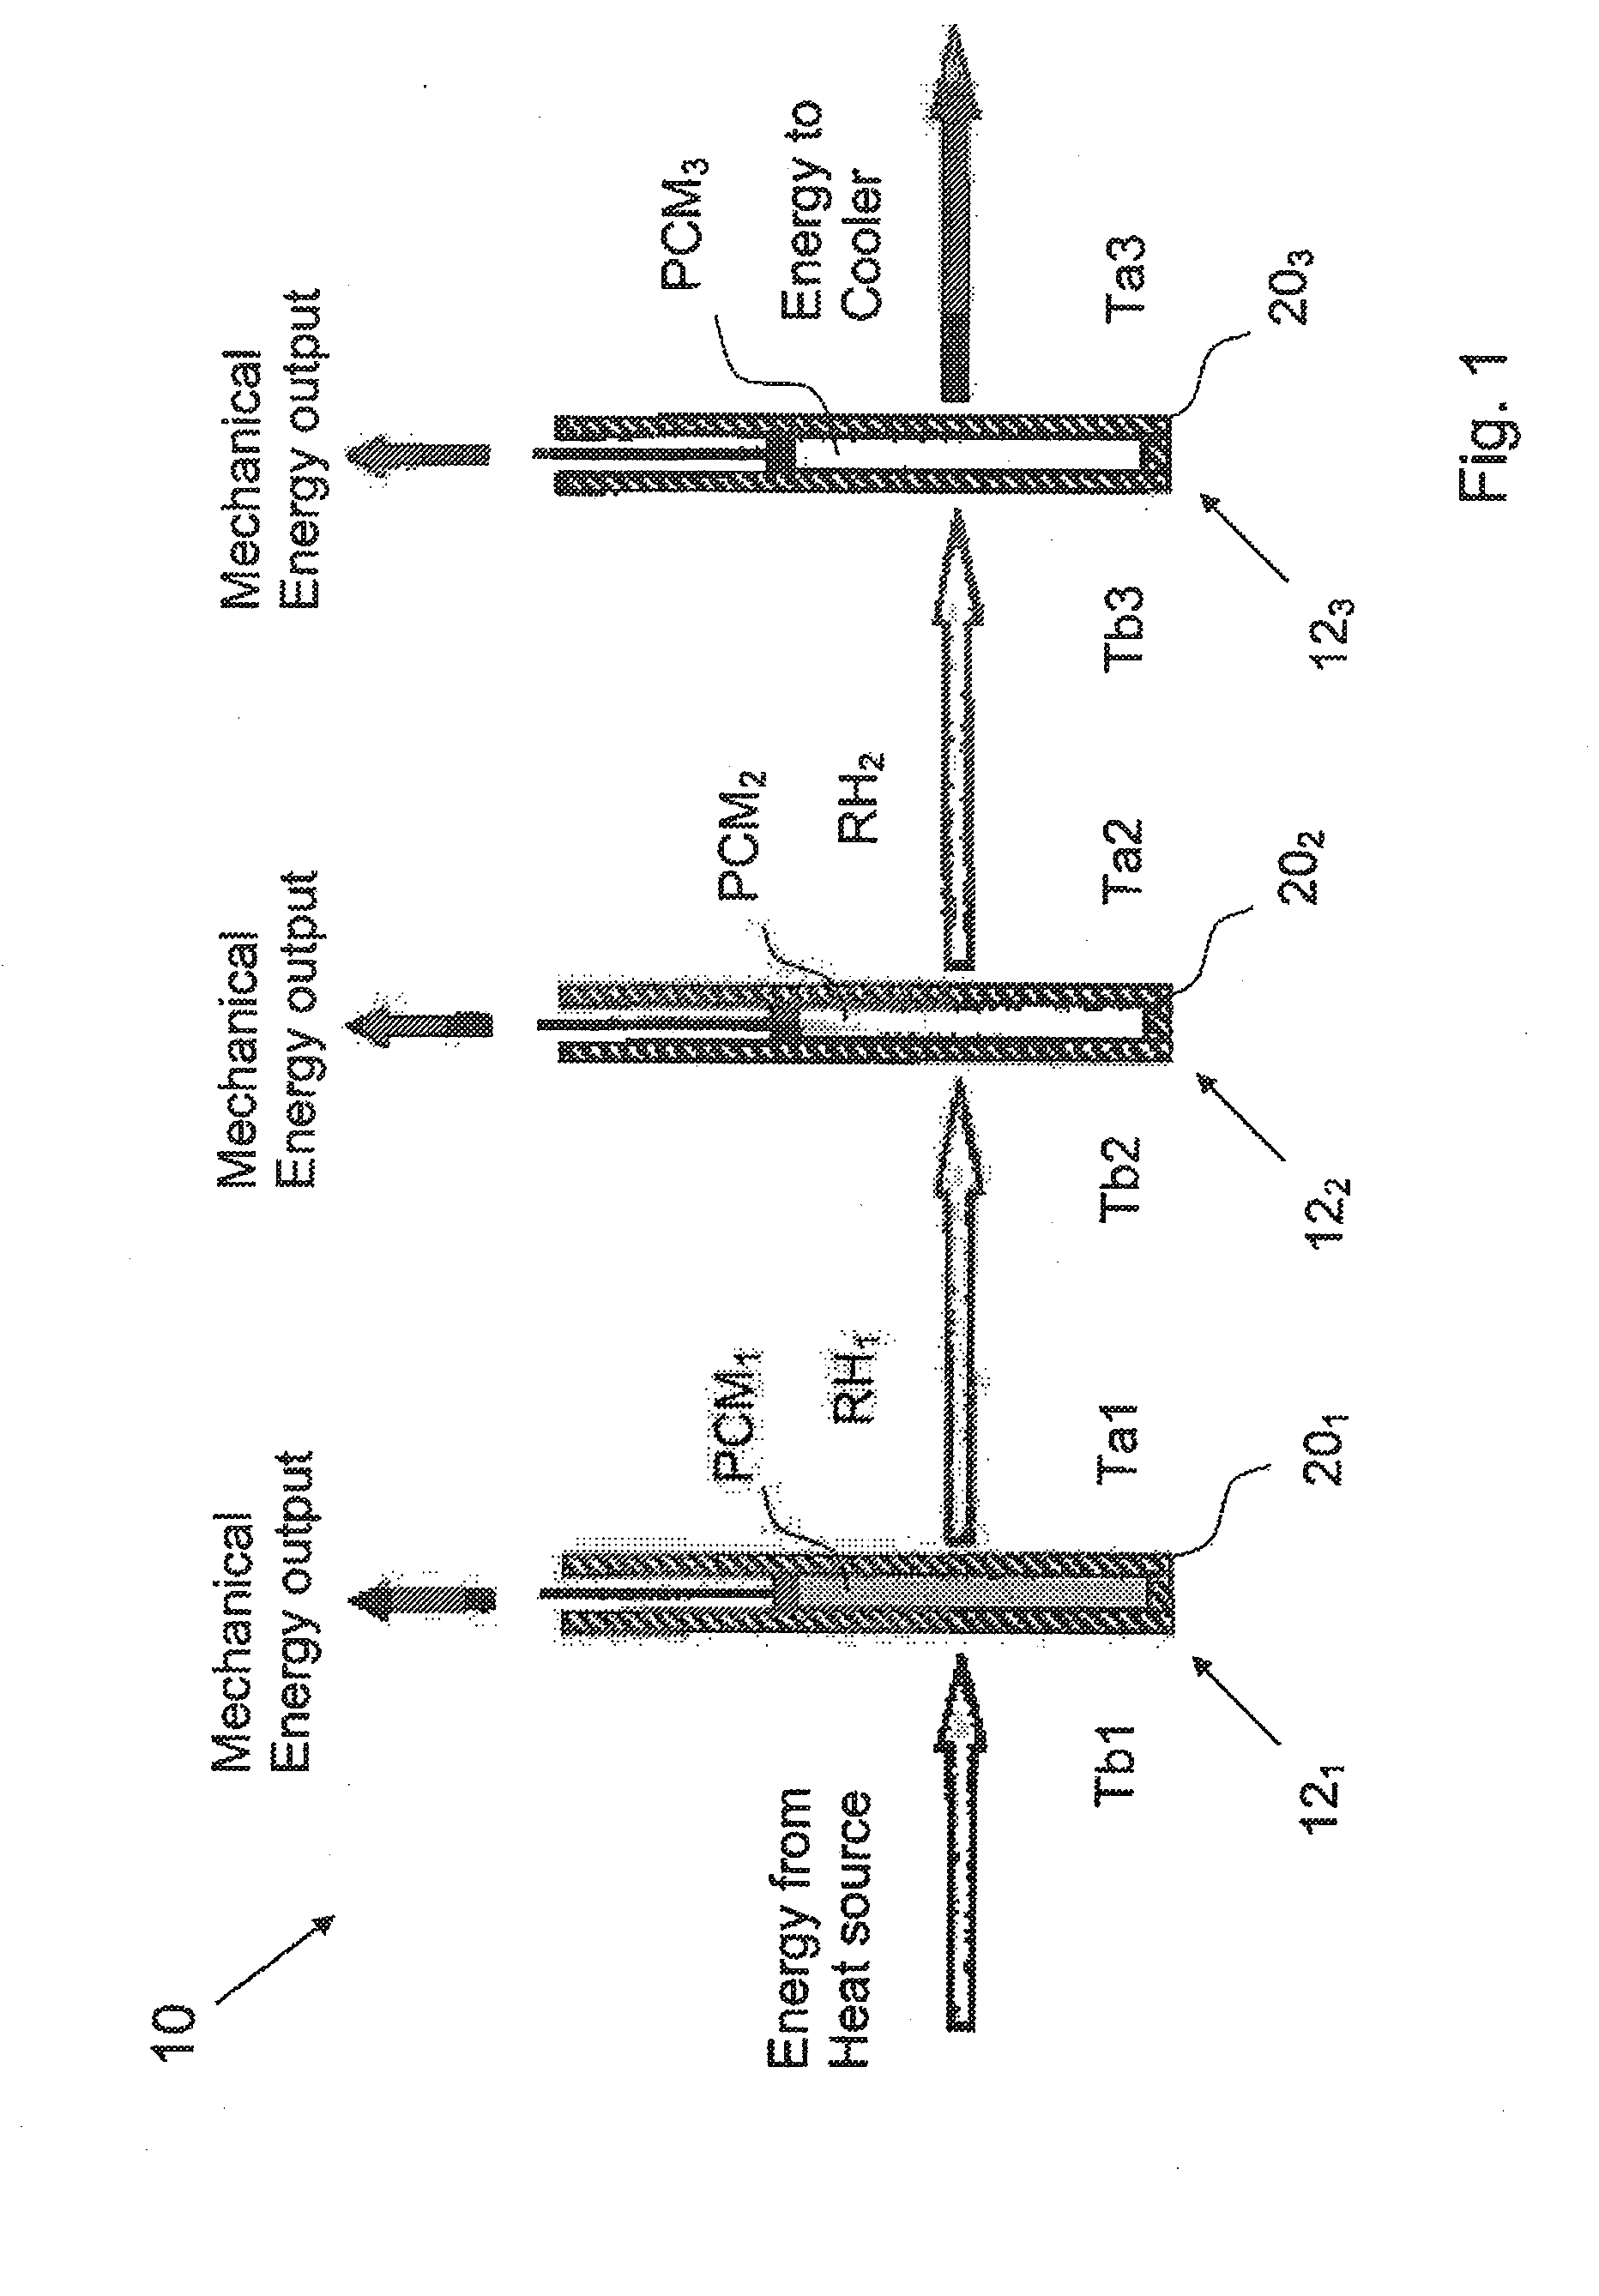 System and method for regenerating heat energy